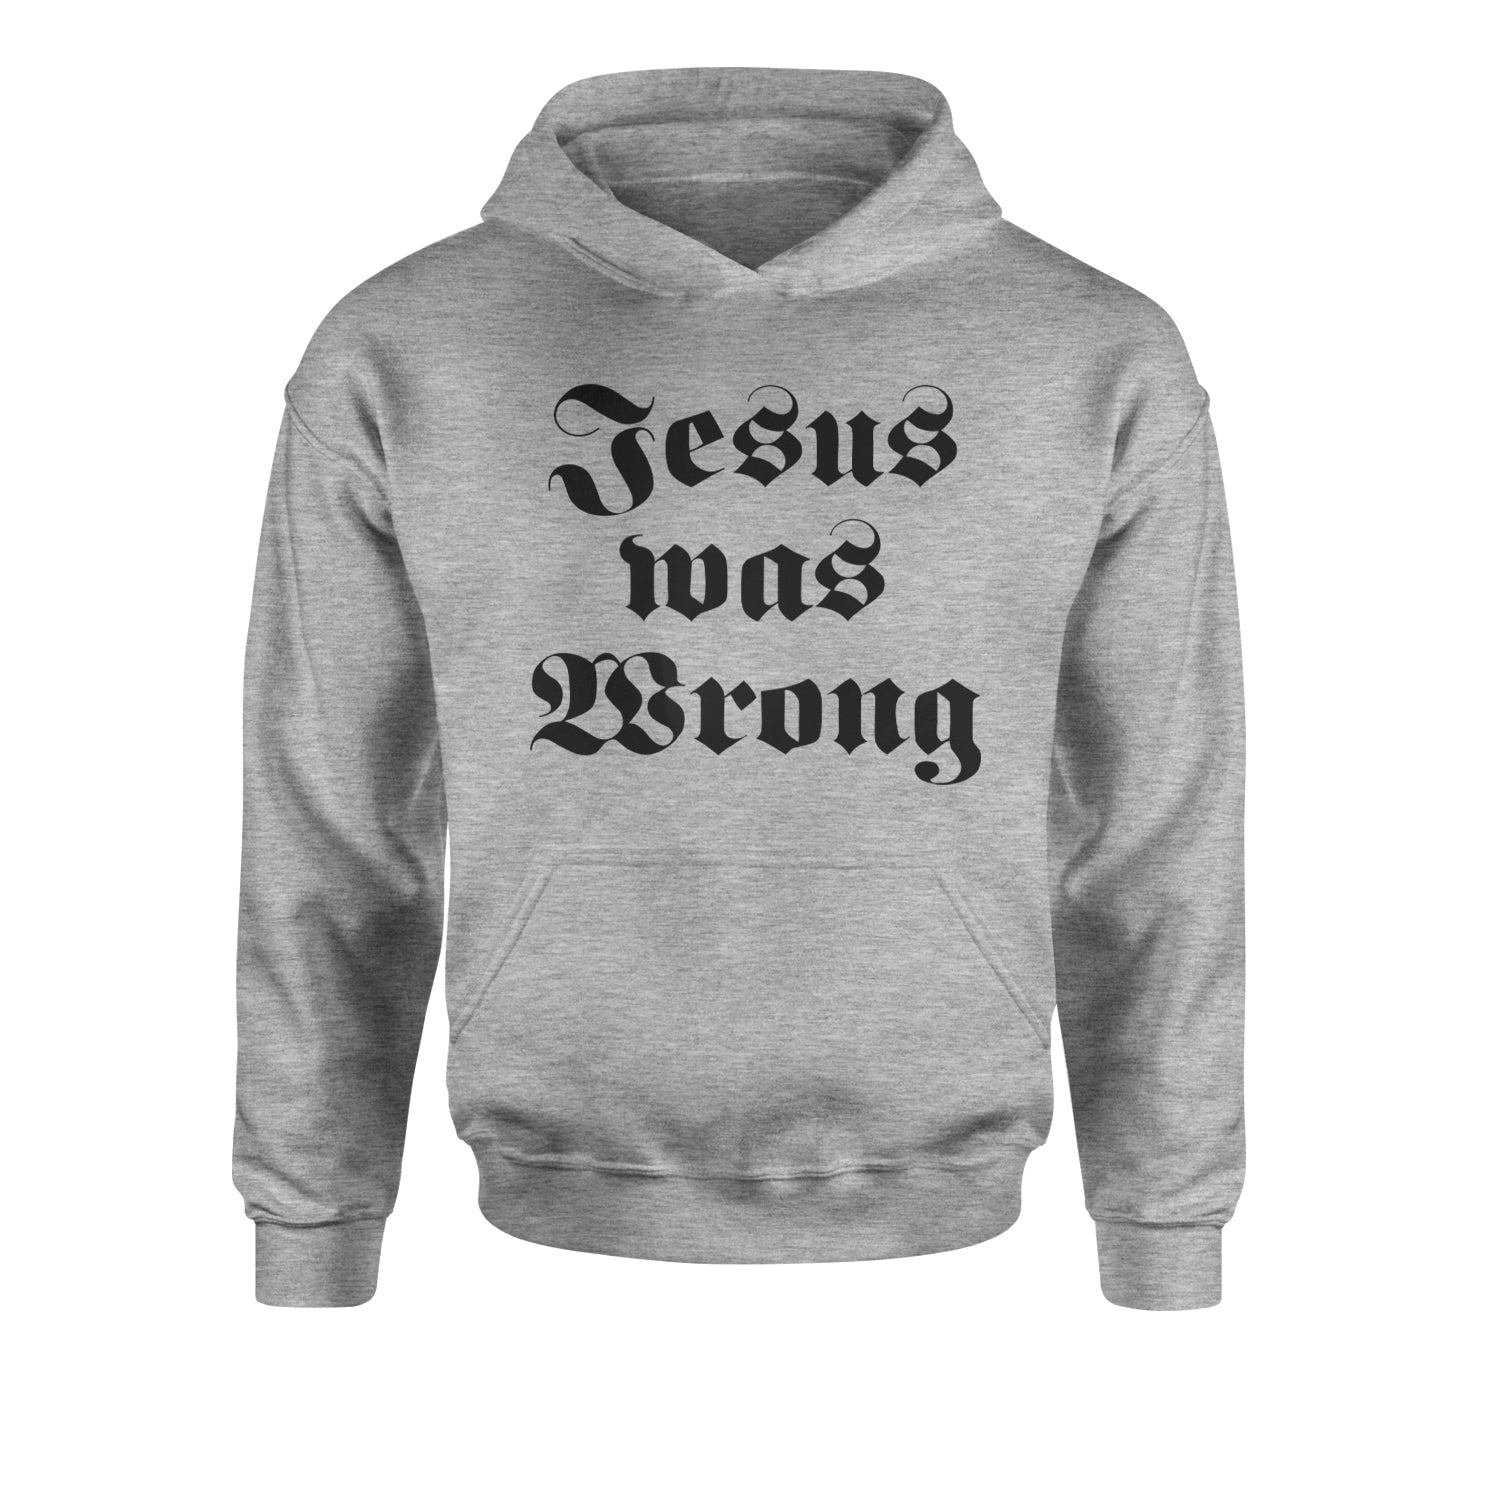 Jesus Was Wrong Little Miss Sunshine Youth-Sized Hoodie breslin, dano, movie, paul, shine, shirt, sun by Expression Tees